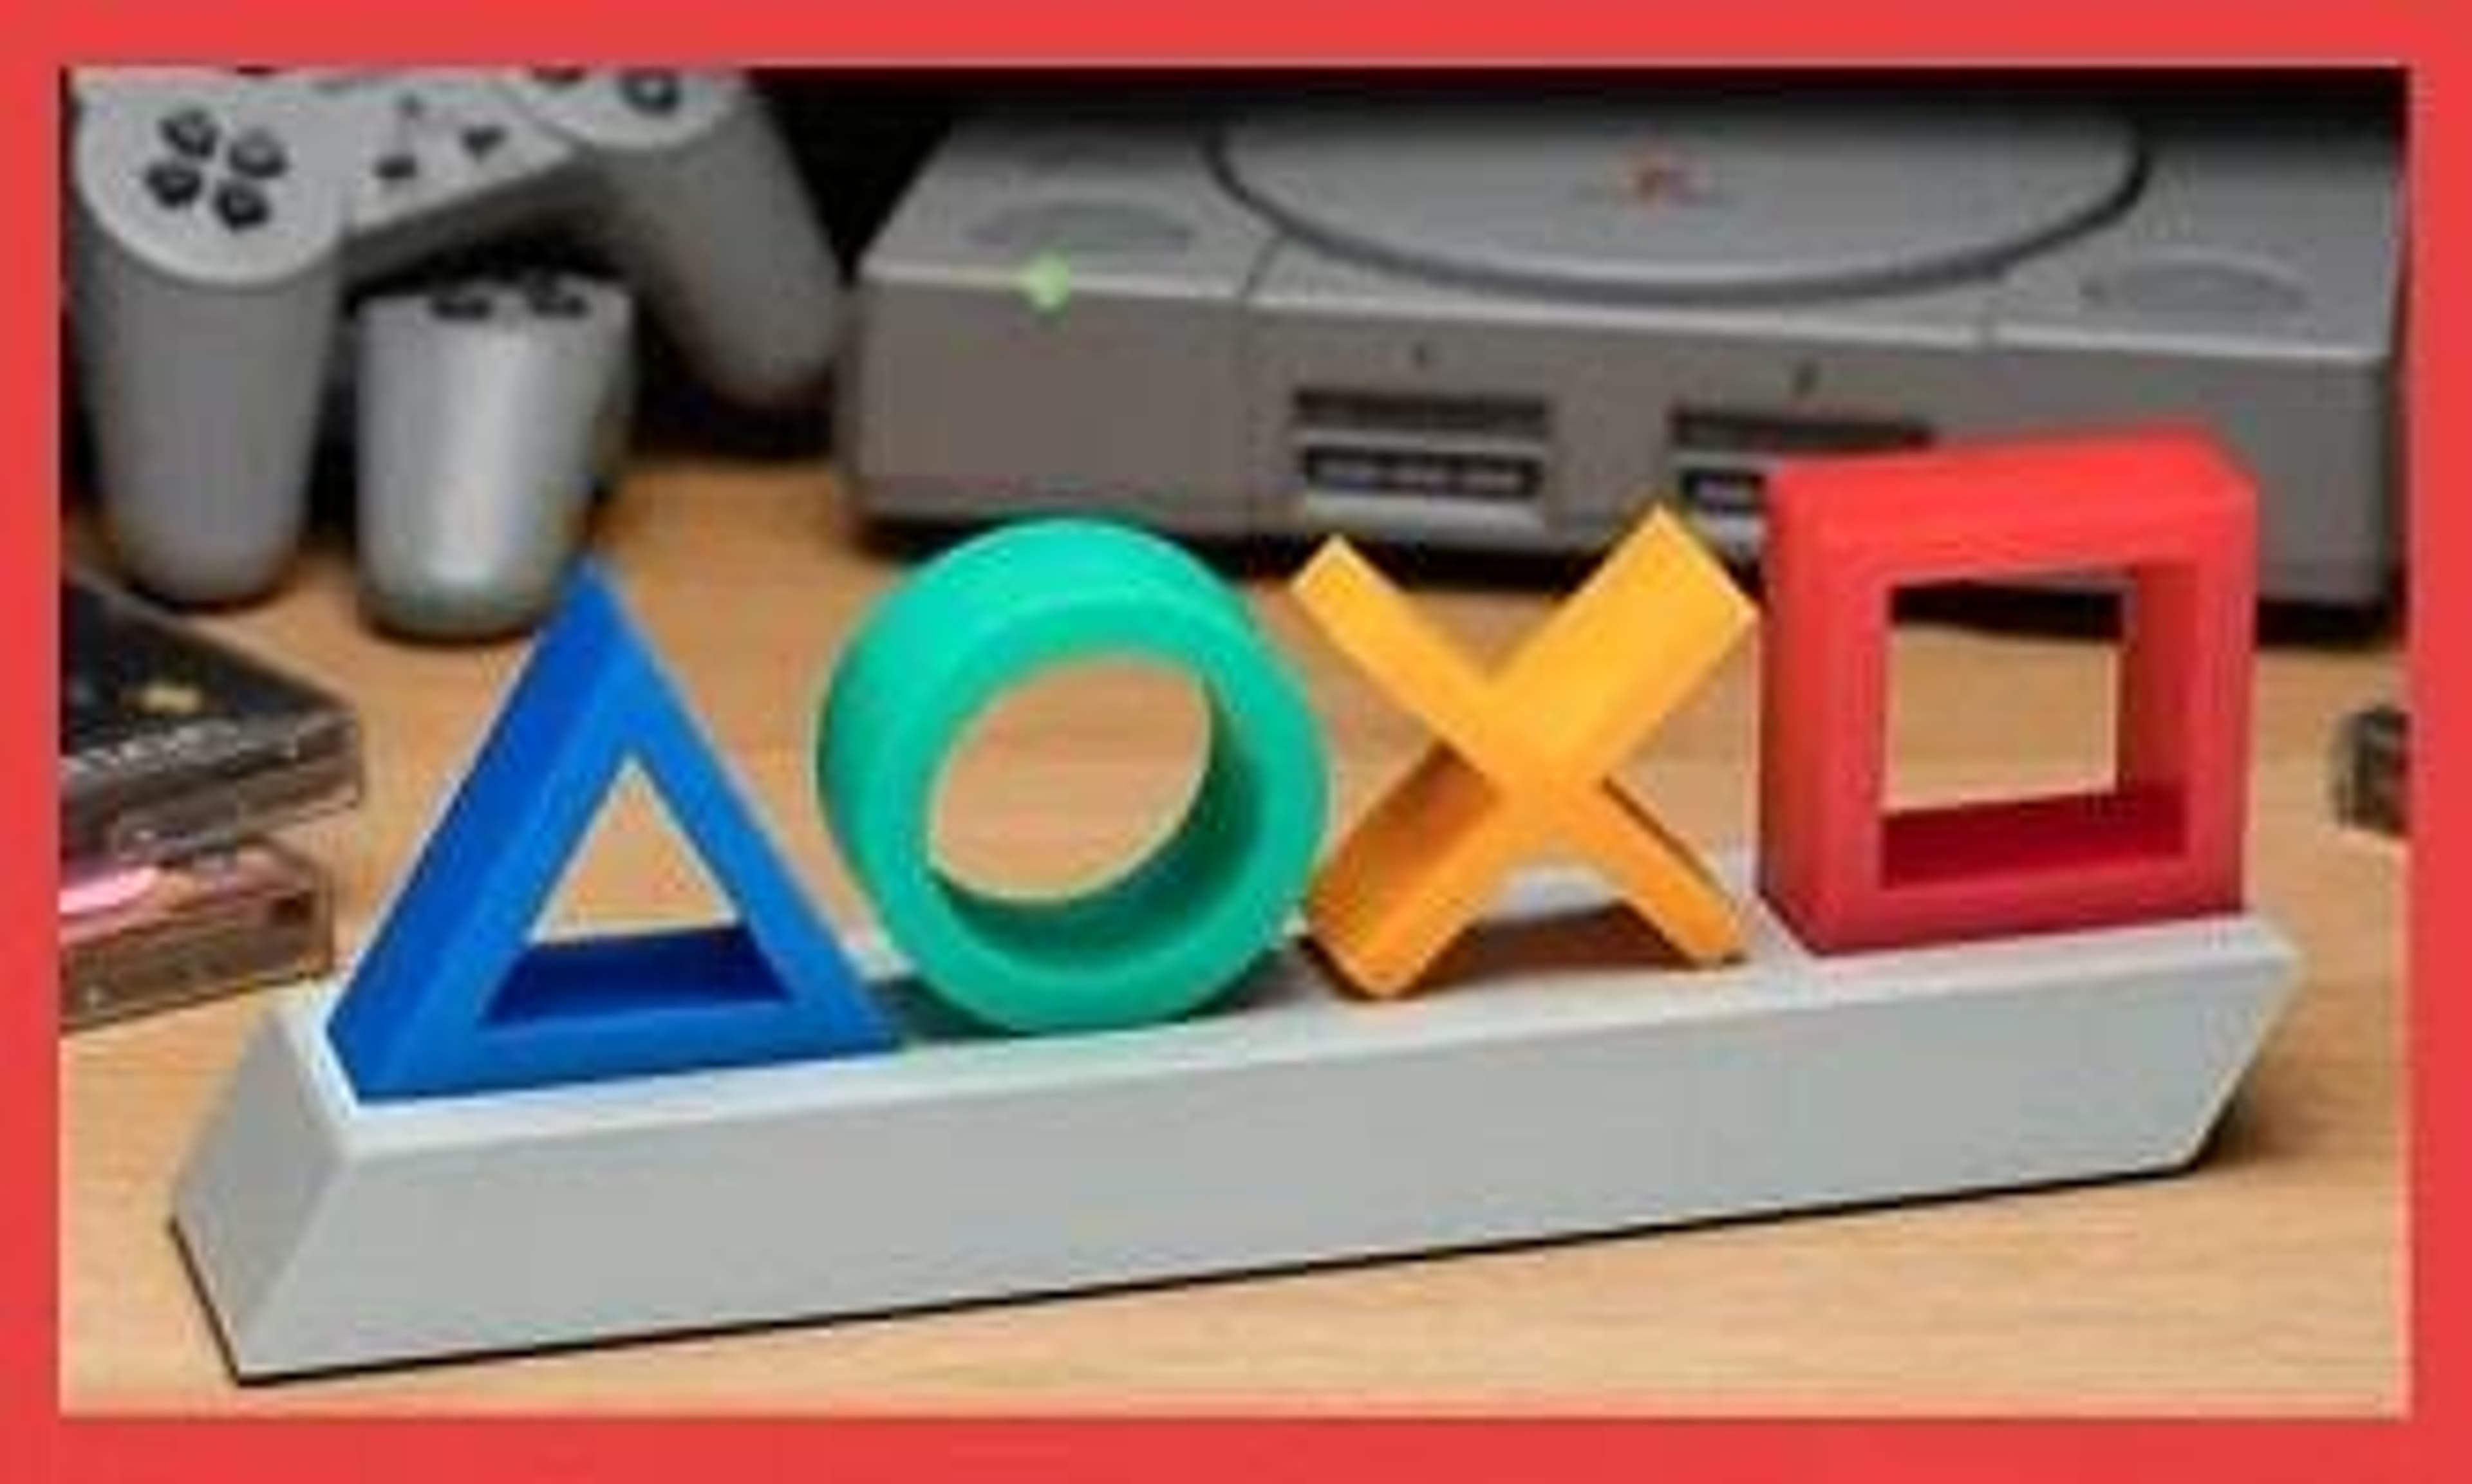  A PlayStation desk decoration from I Want One of Those 